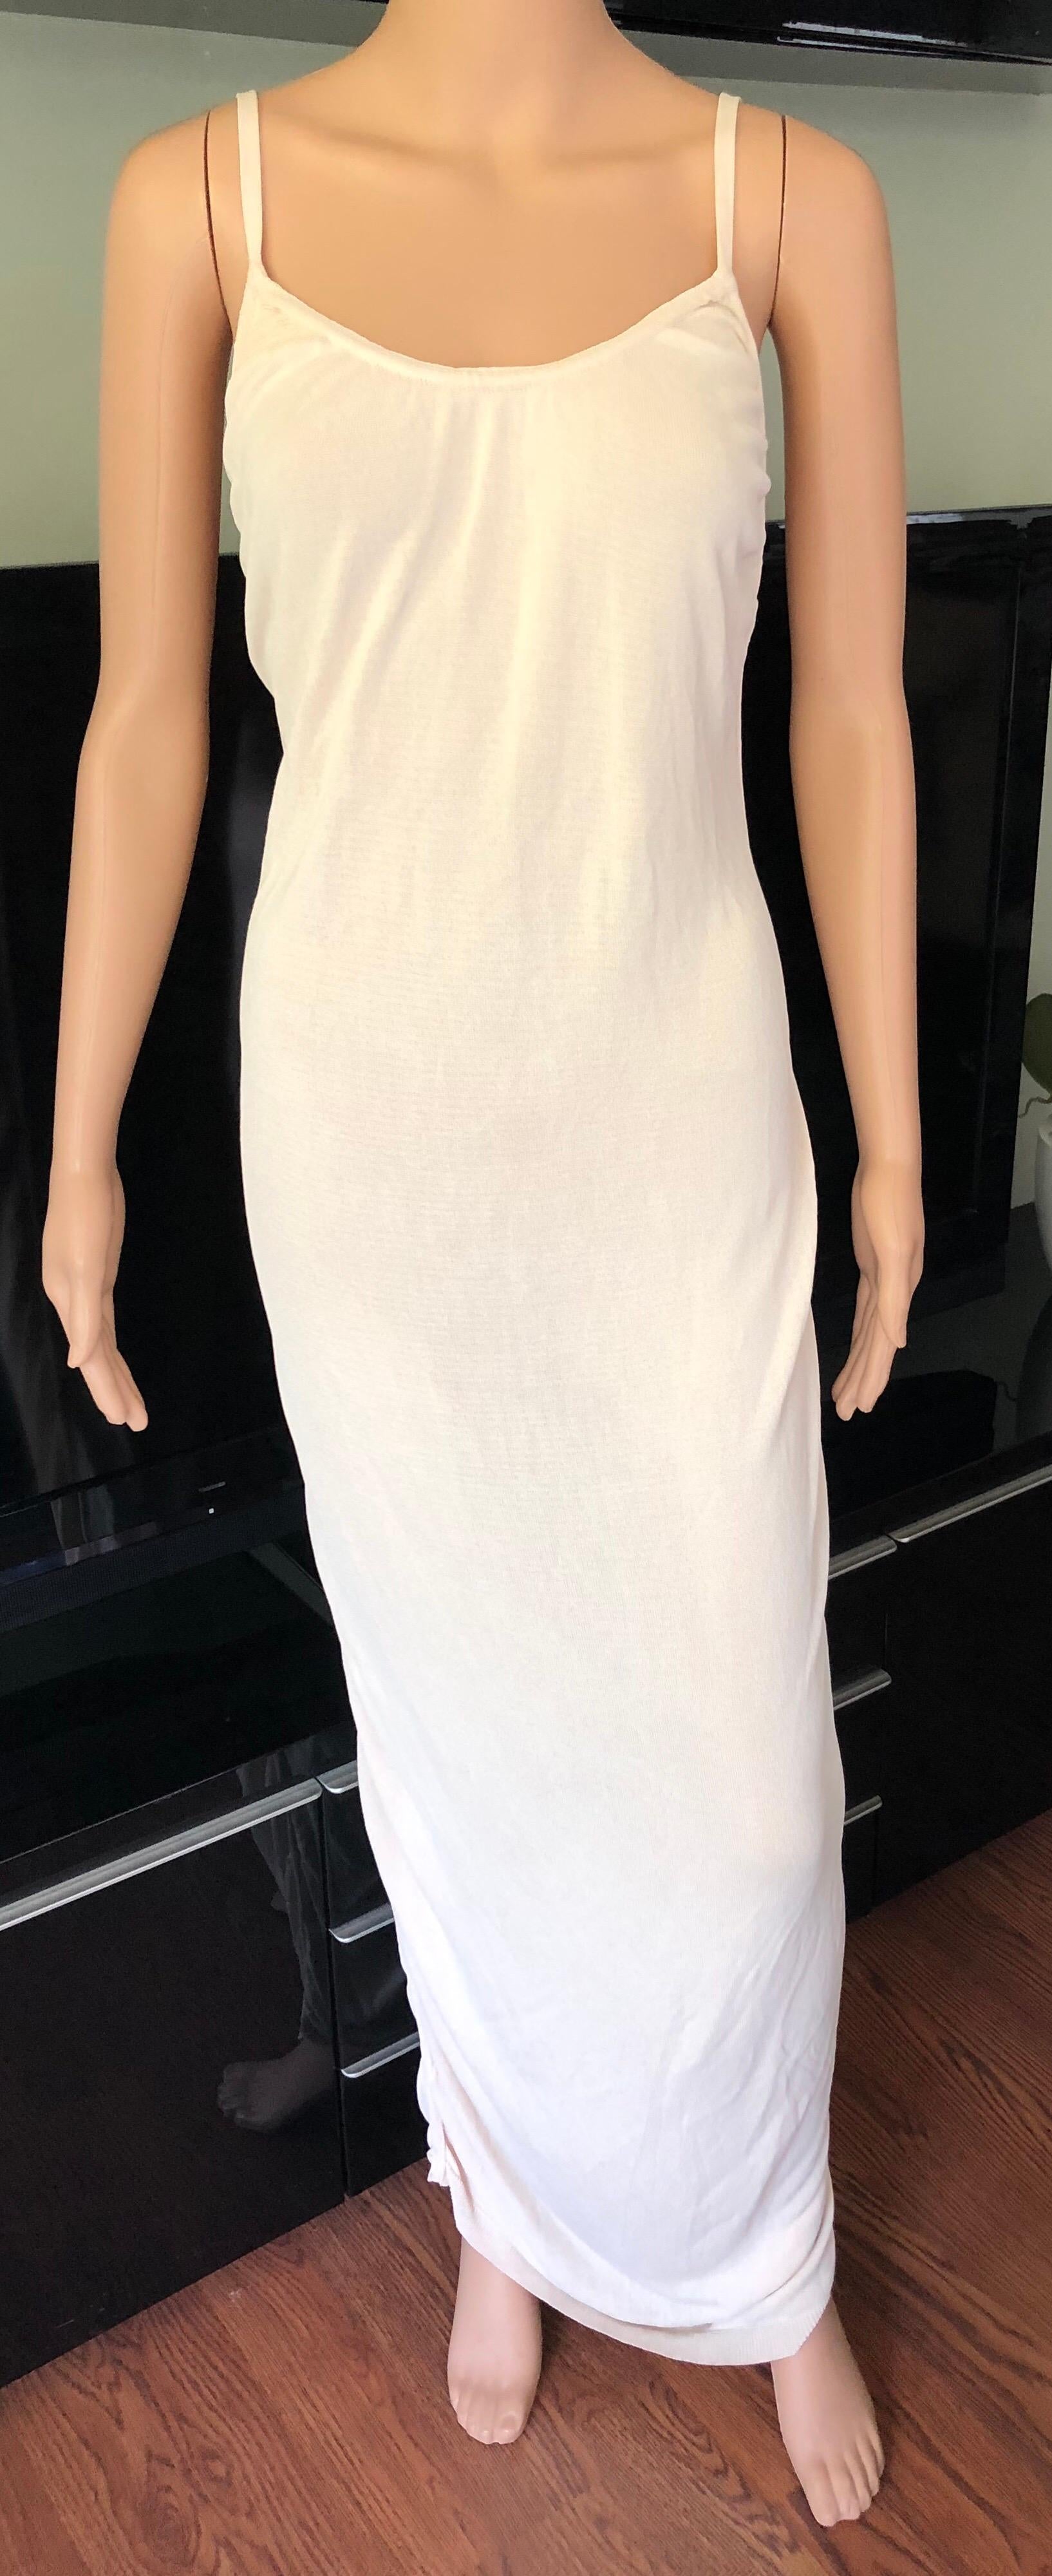 Azzedine Alaia Vintage Dress Gown S/M

Creme Alaïa sleeveless ruched open back dress with tonal stitching throughout and scoop neck.Please note fabric and size tags have been removed.

All Eyes on Alaïa

For the last half-century, the world’s most